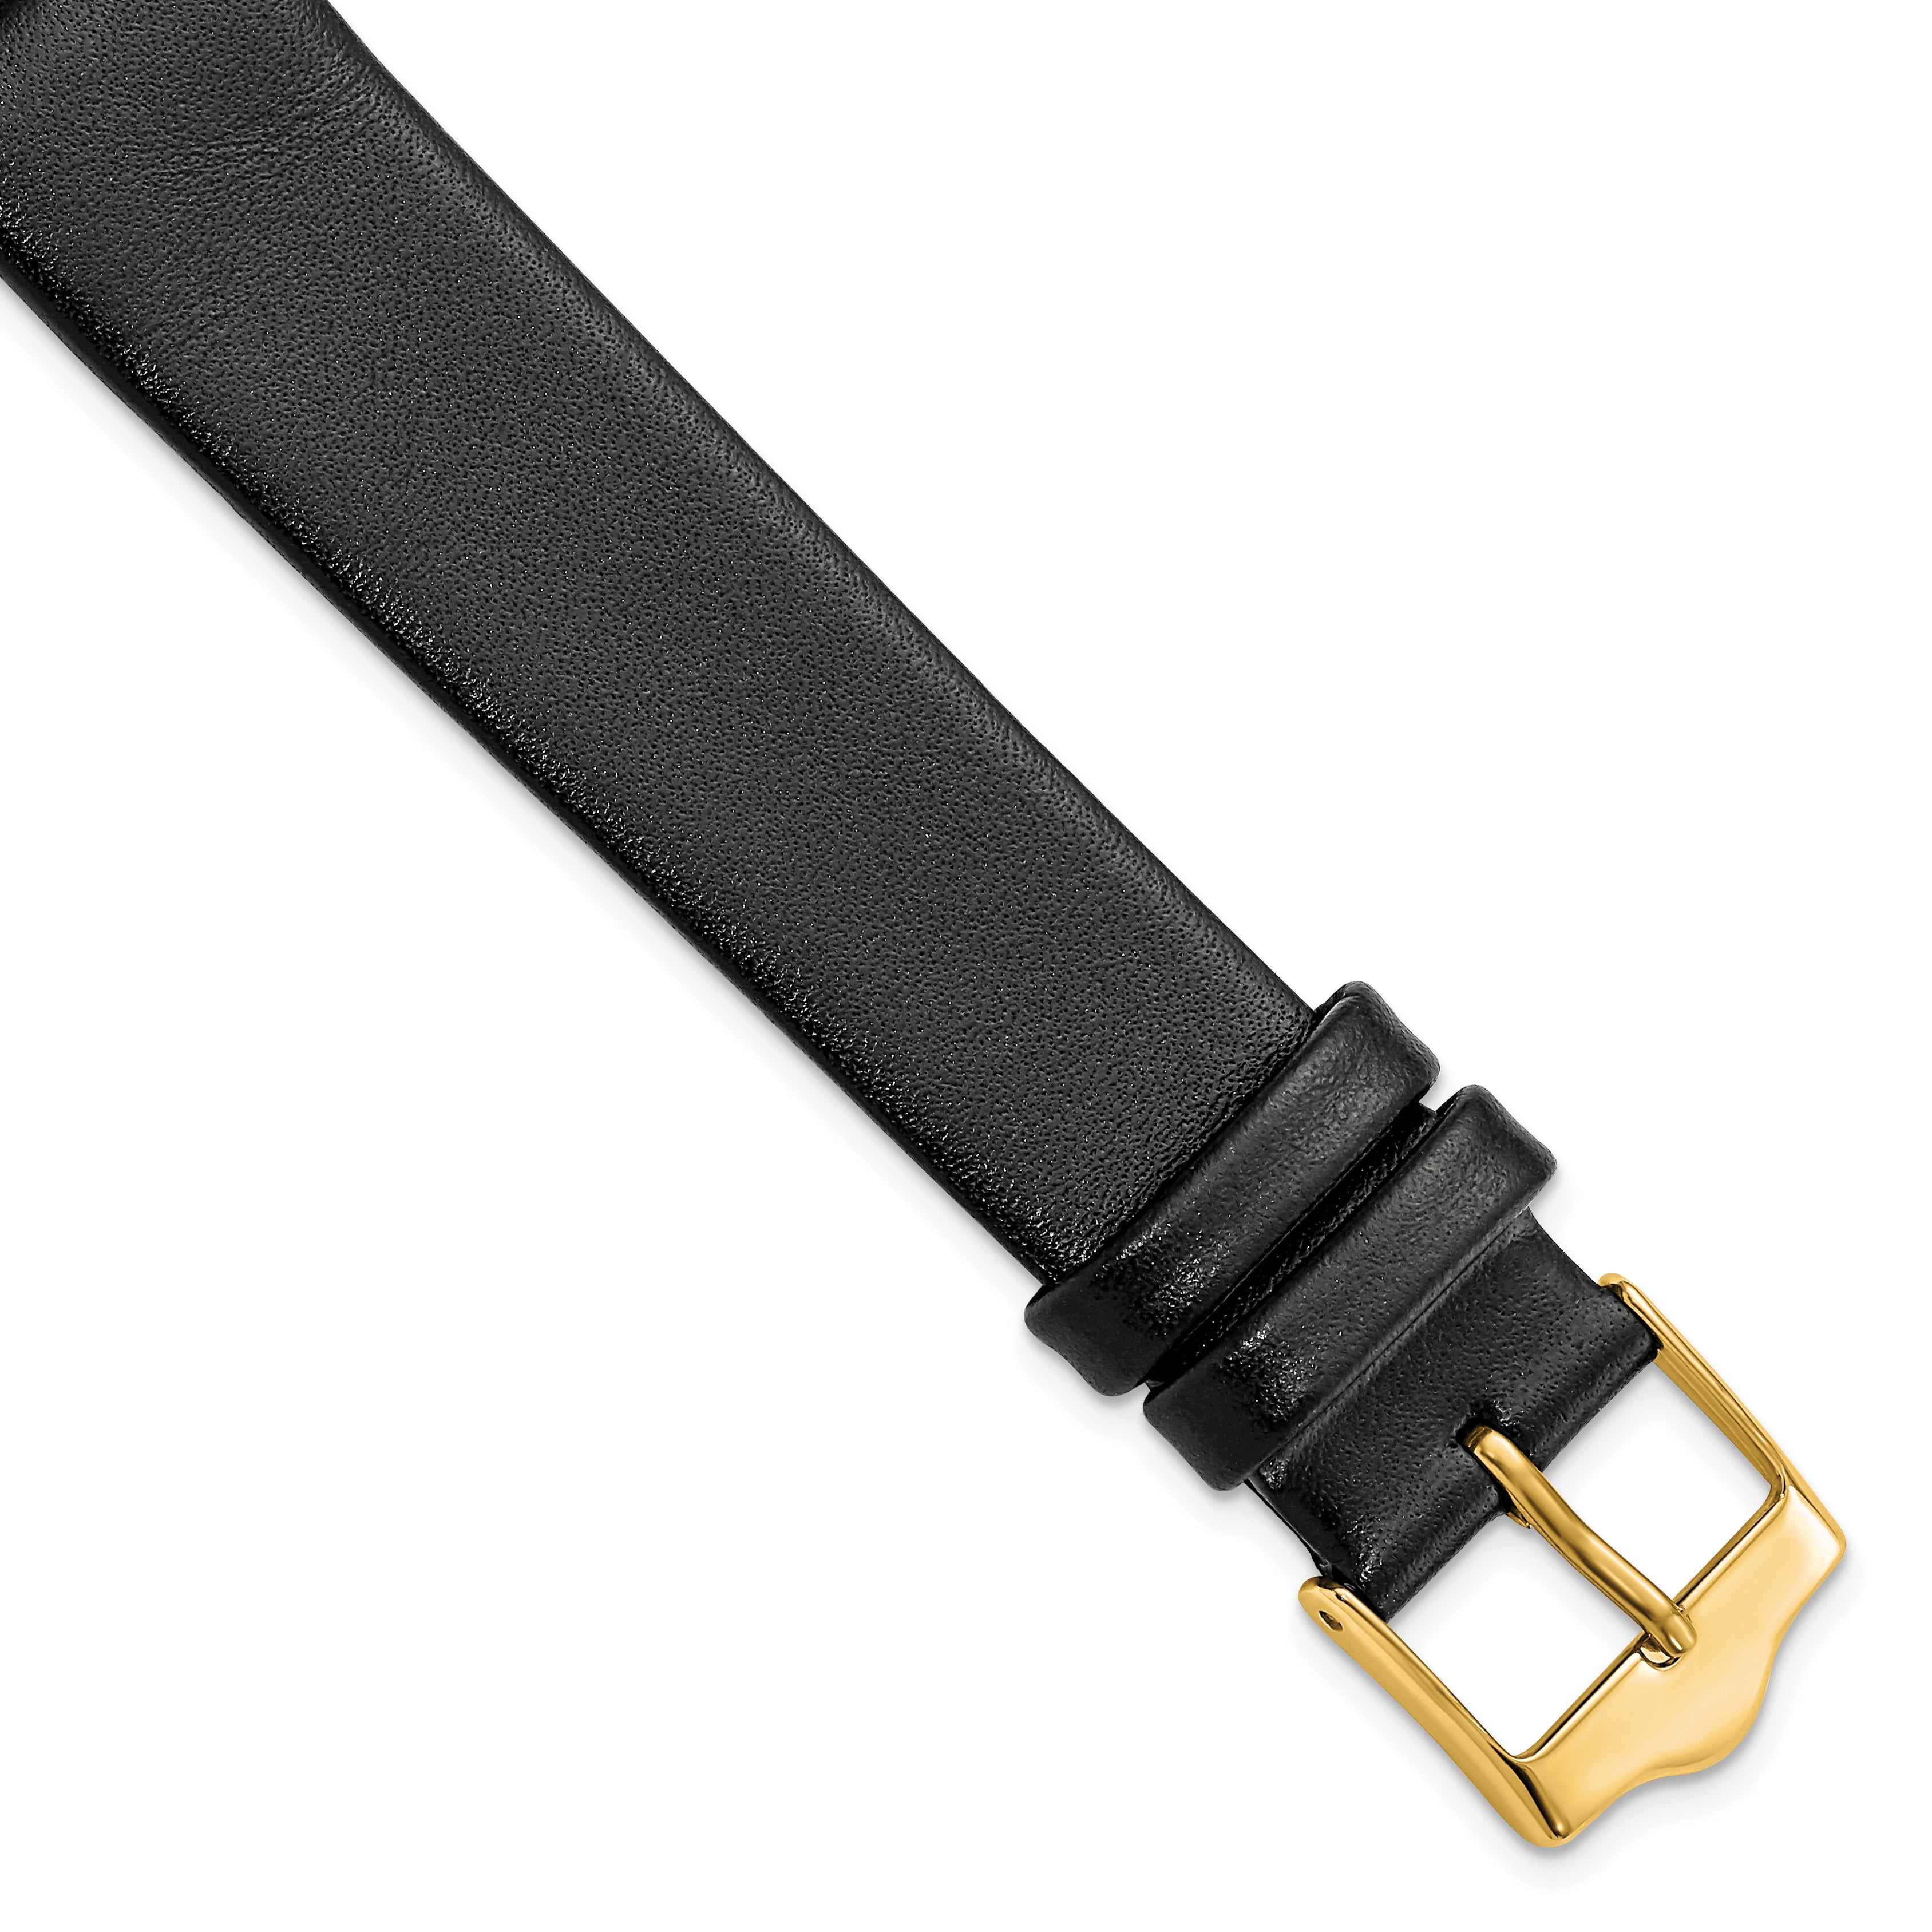 DeBeer 18mm Black Long Smooth Flat Leather with Gold-tone Buckle 8.5 inch Watch Band